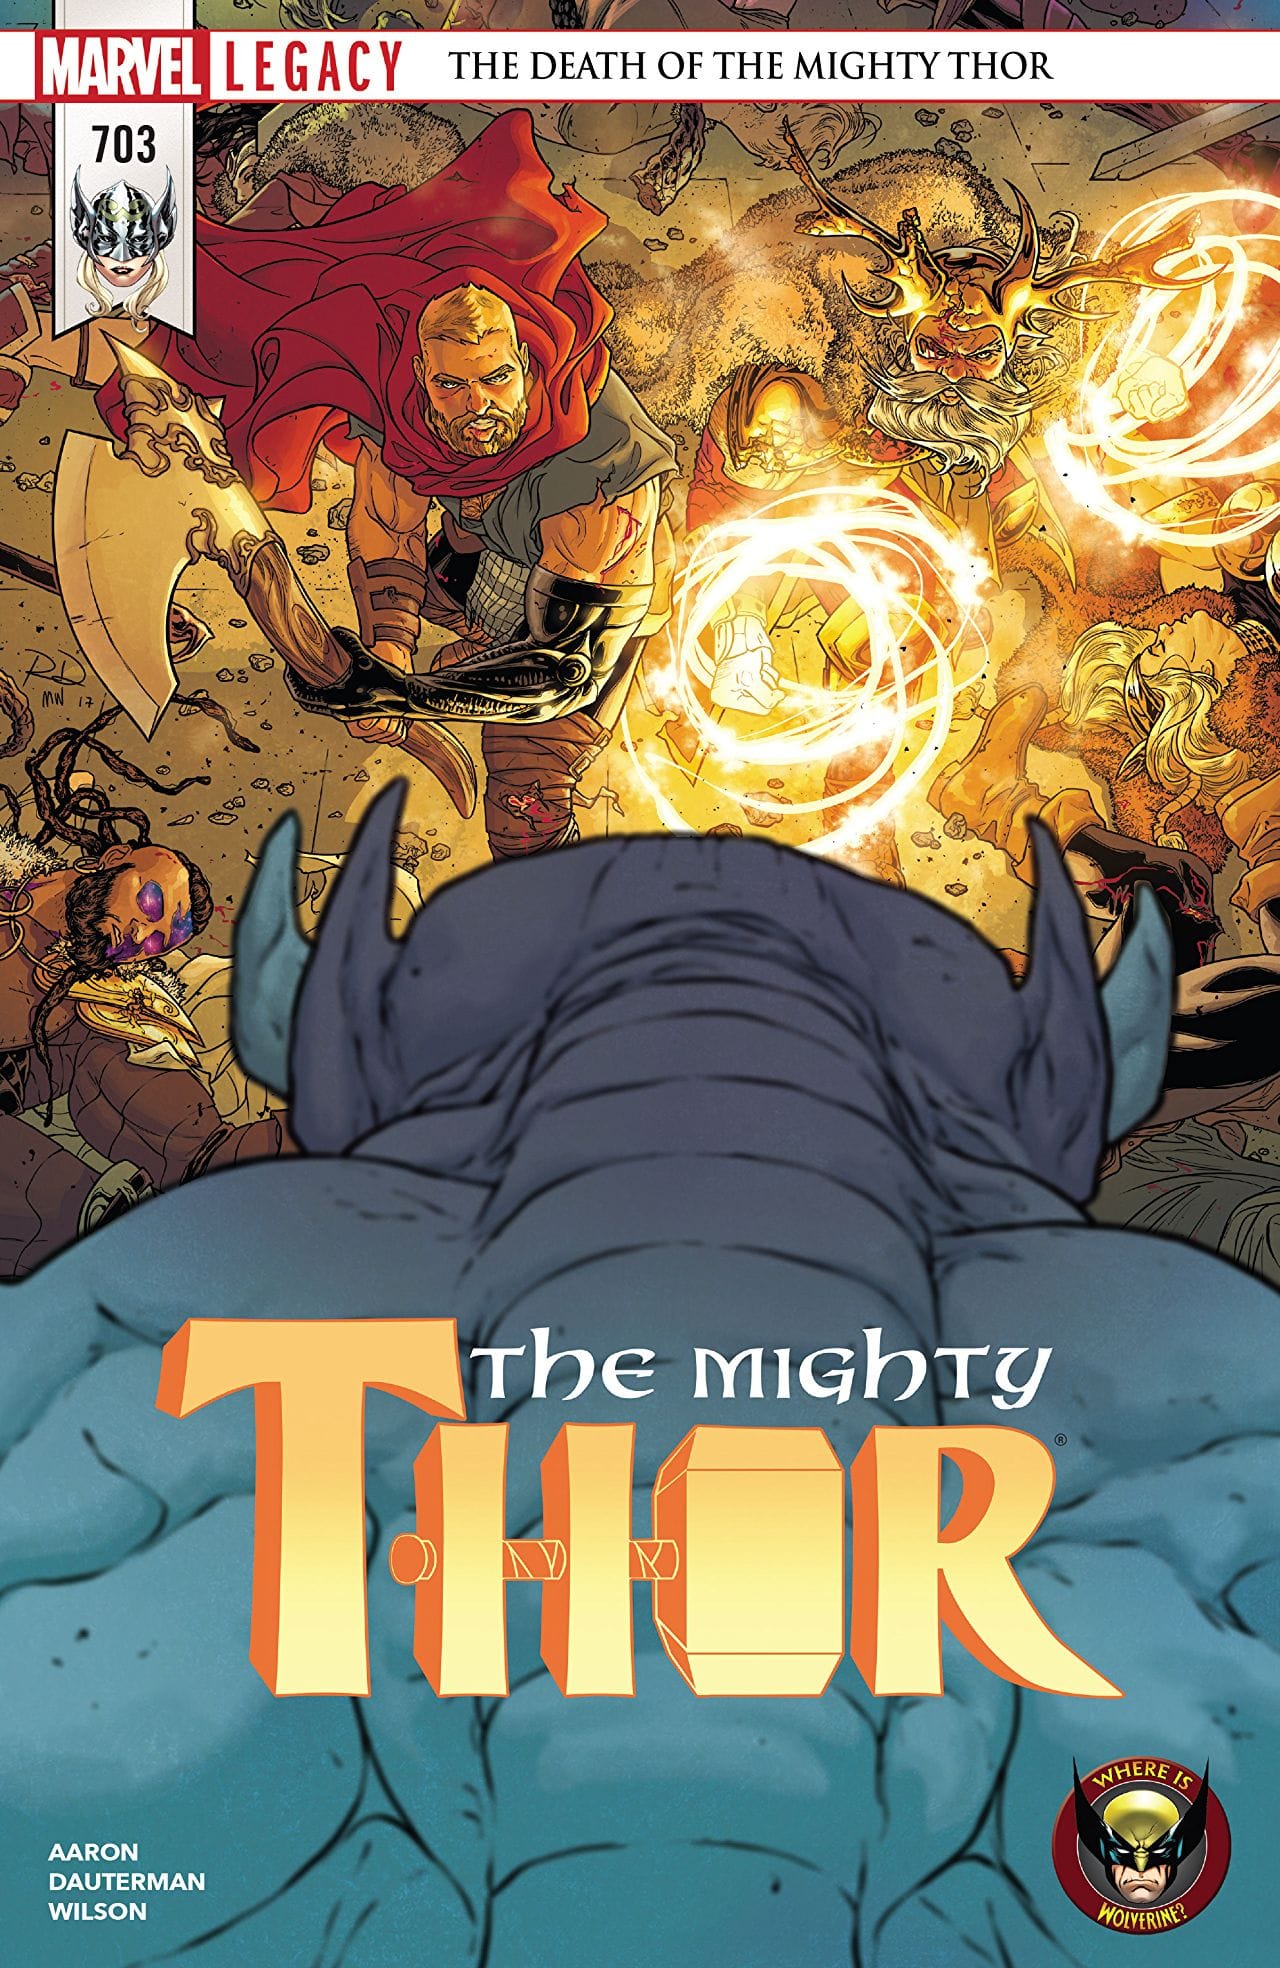 The Mighty Thor #703 review: The End is Nigh